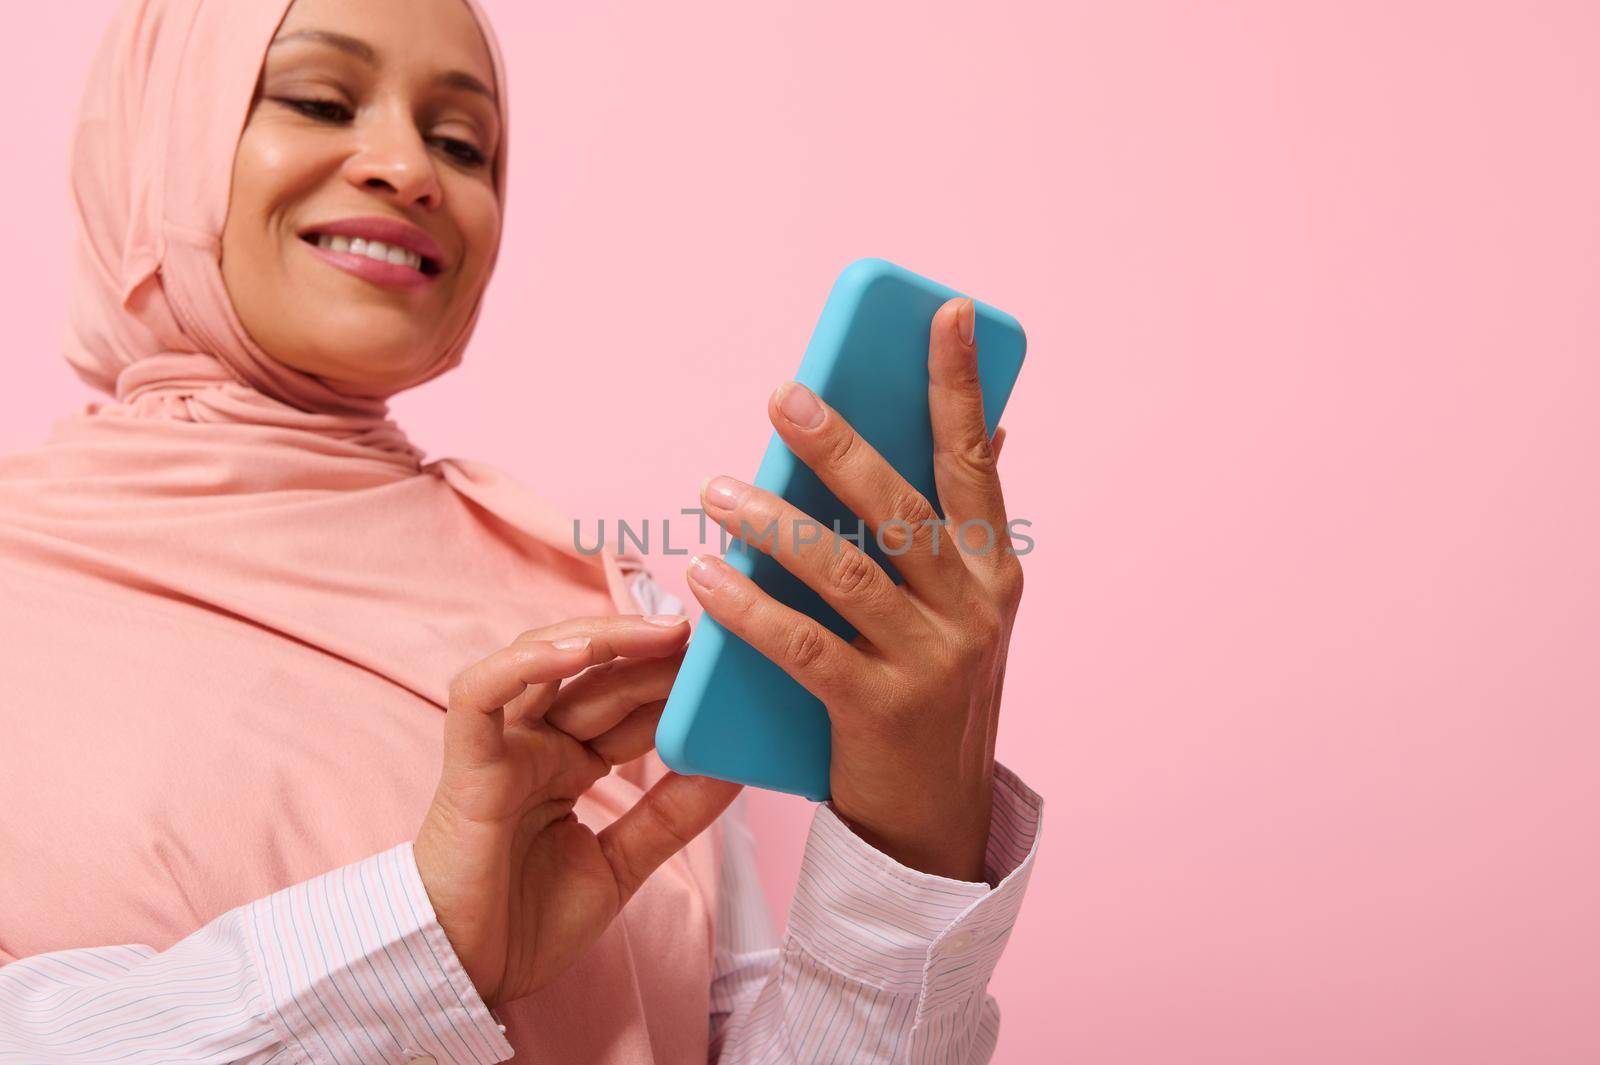 Smiling with toothy smile mature Muslim woman of Middle Eastern ethnicity in pink hijab with smartphone in blue cover on her hands, isolated on pink pastel background with copy space for promotion